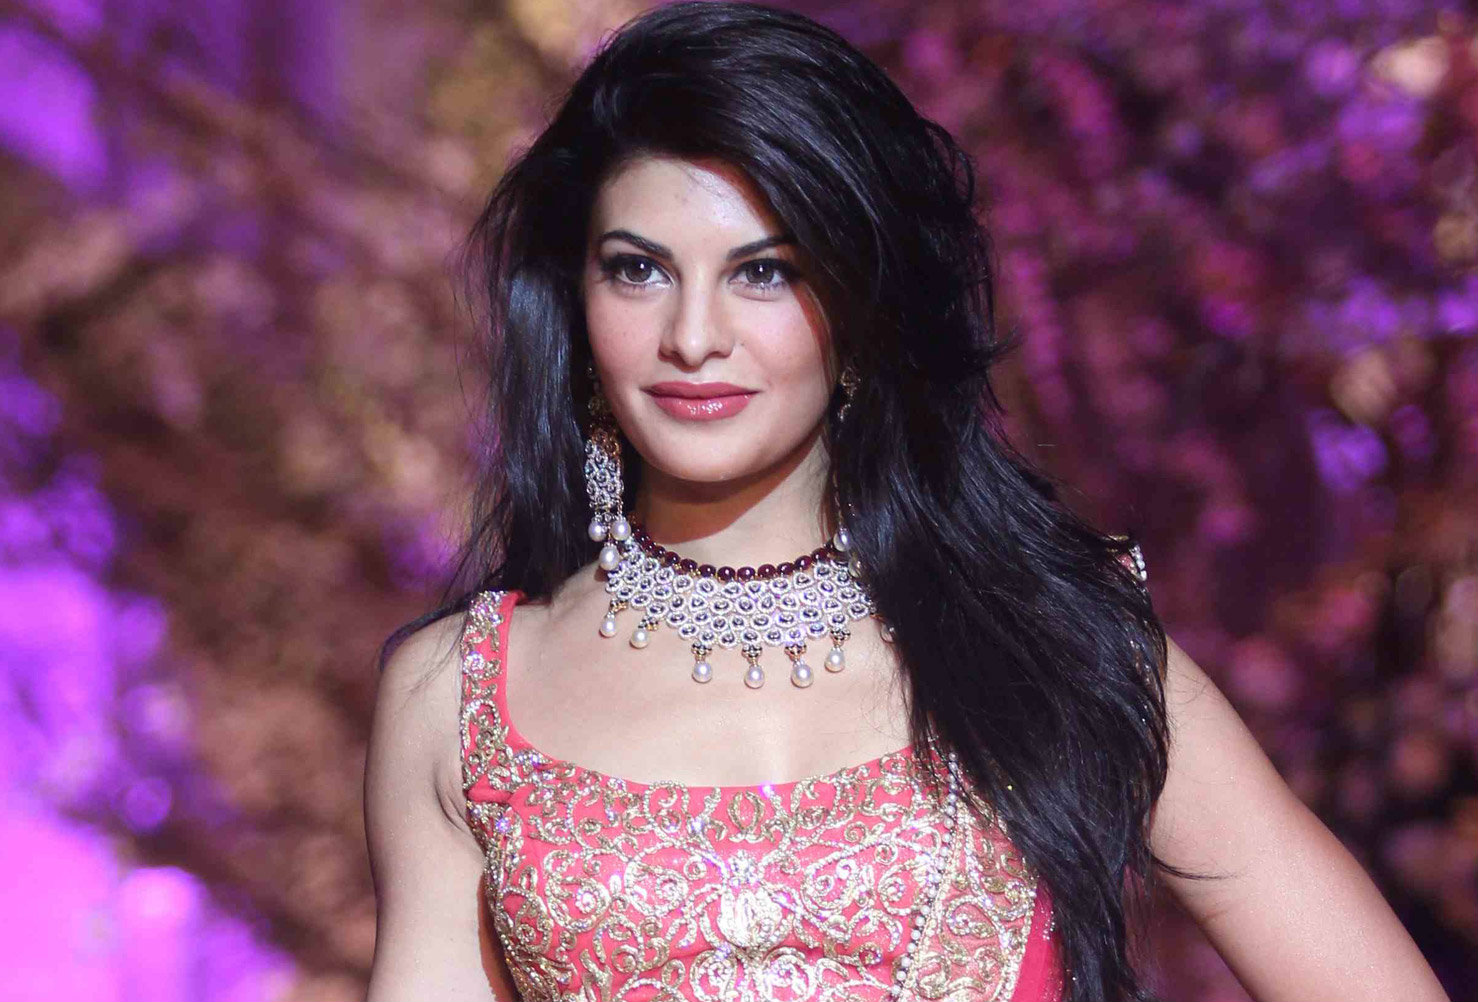 Jacqueline Fernandez on her family and team members